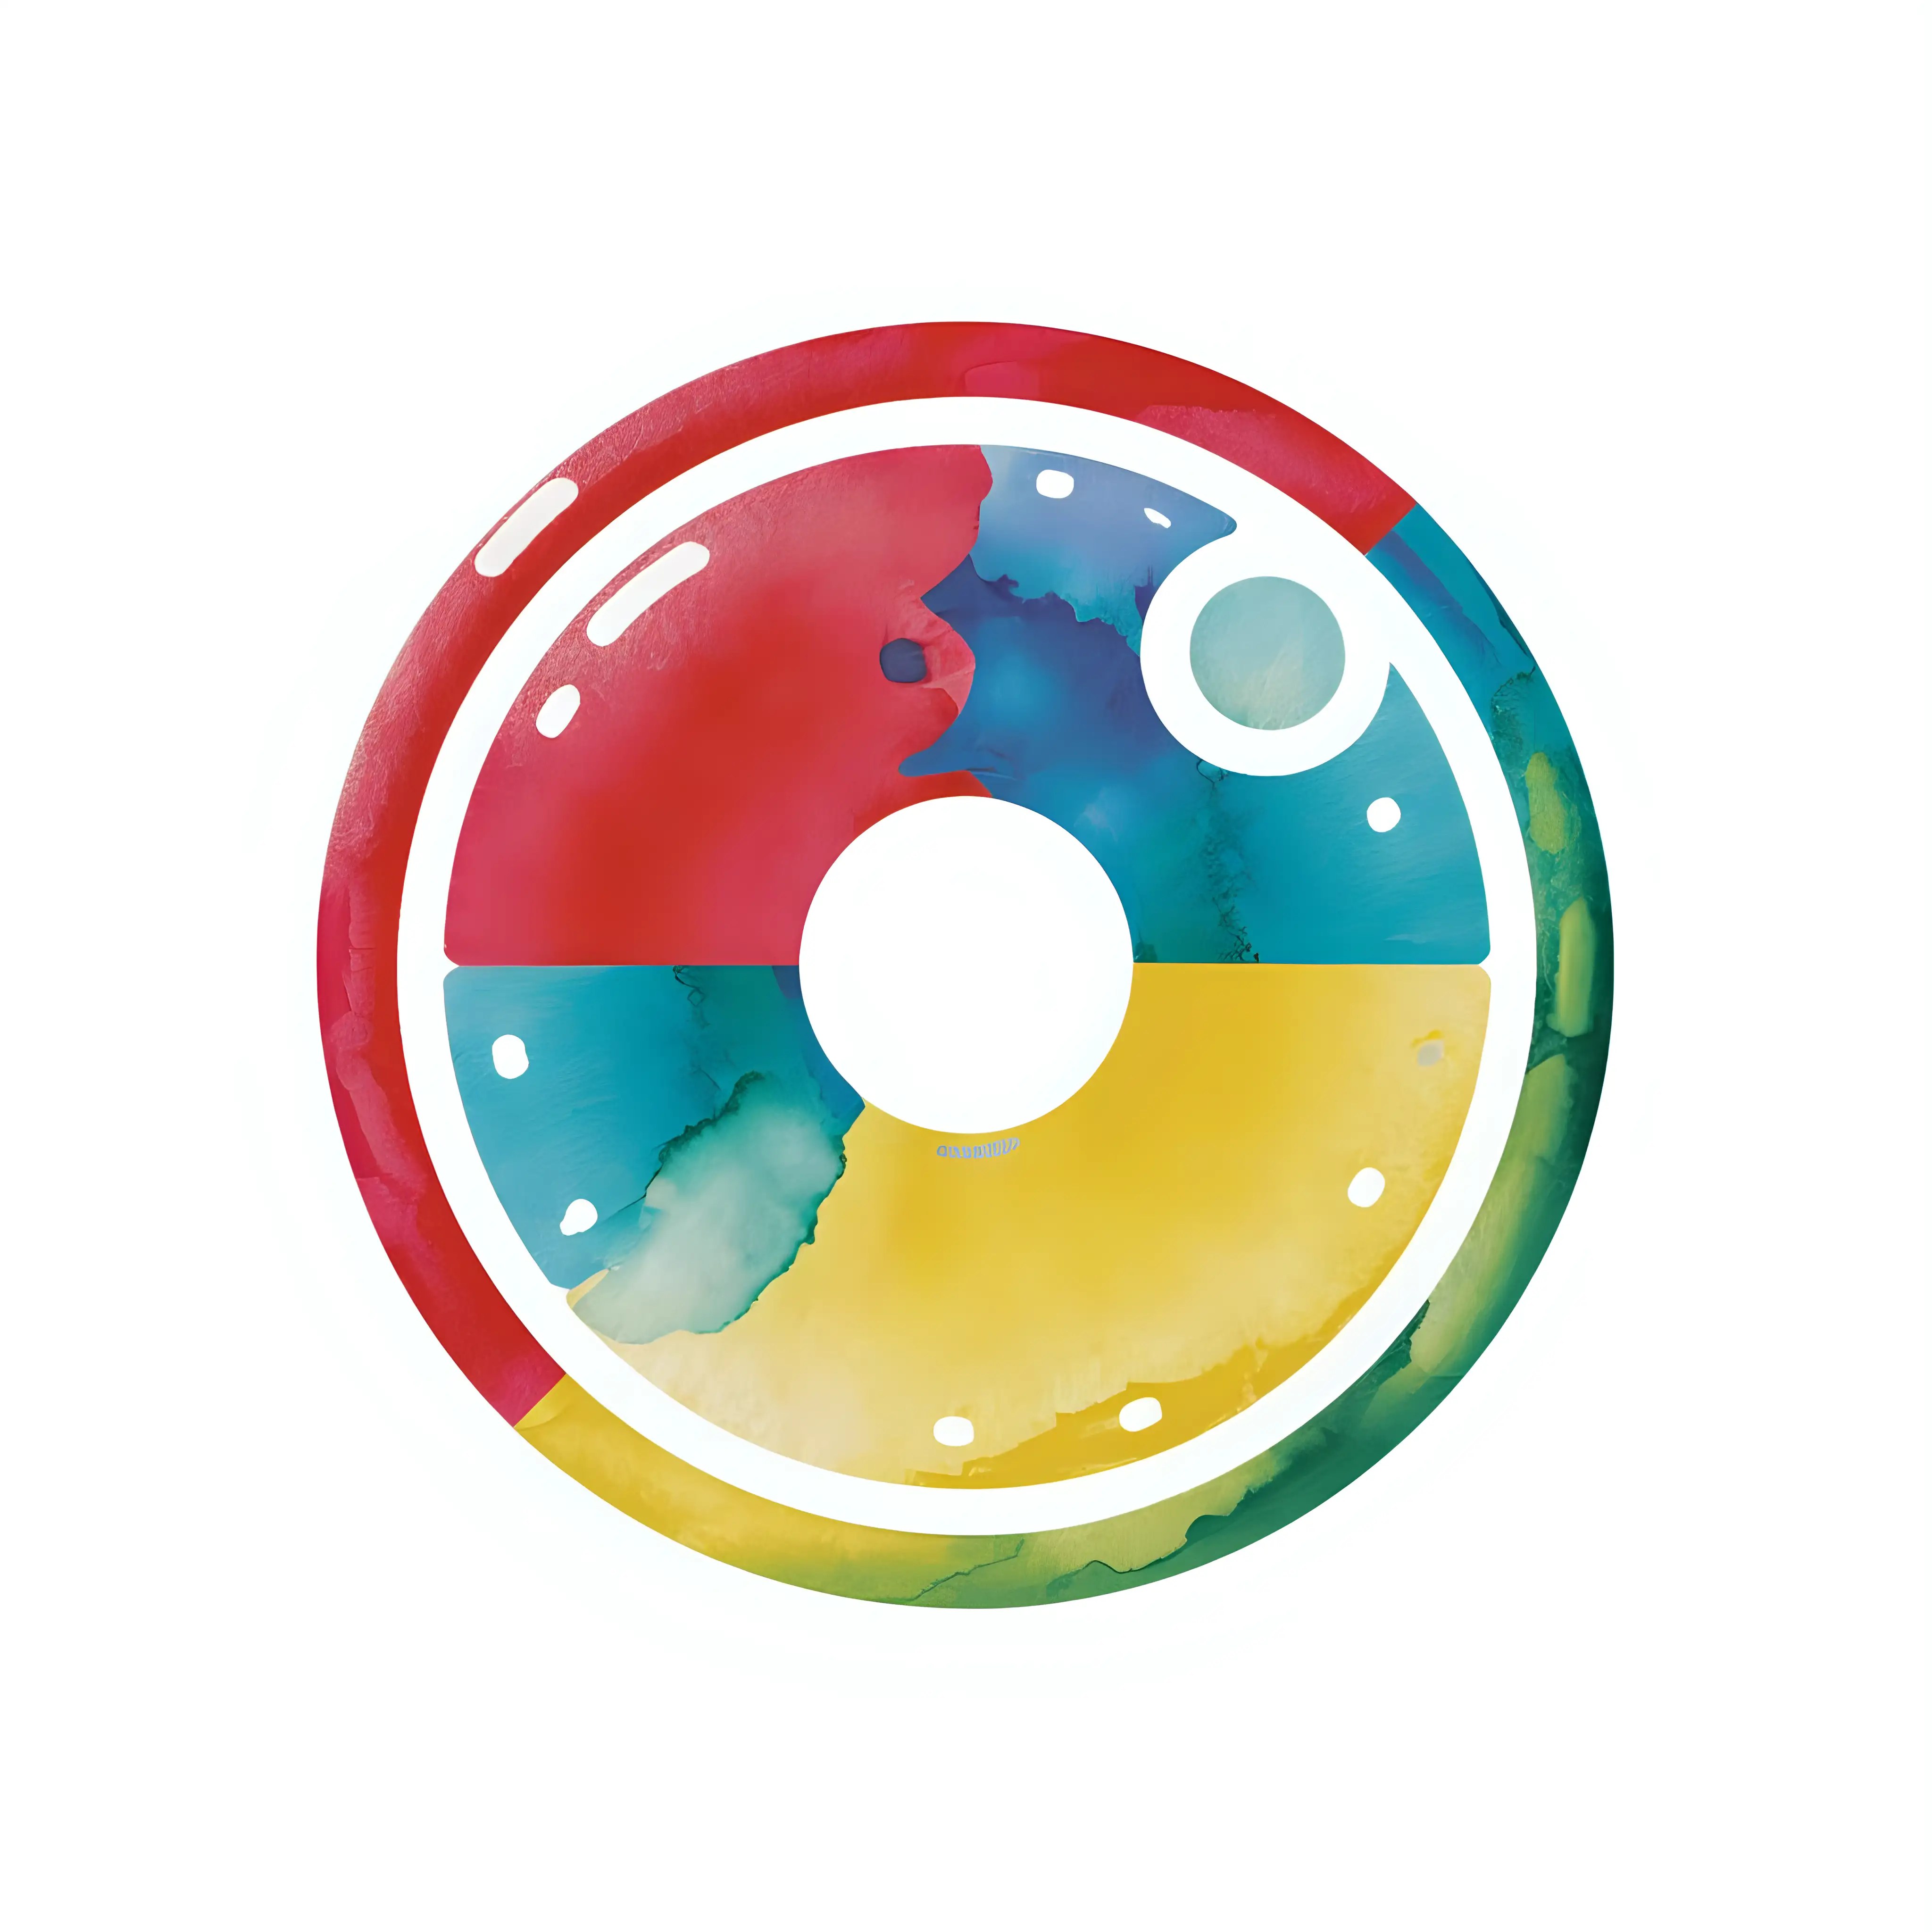 A red, blue, yellow and green clean, artistic, colorful, expressive, bubbly, fun, retro, minimalist, watercolor logo of a CD.